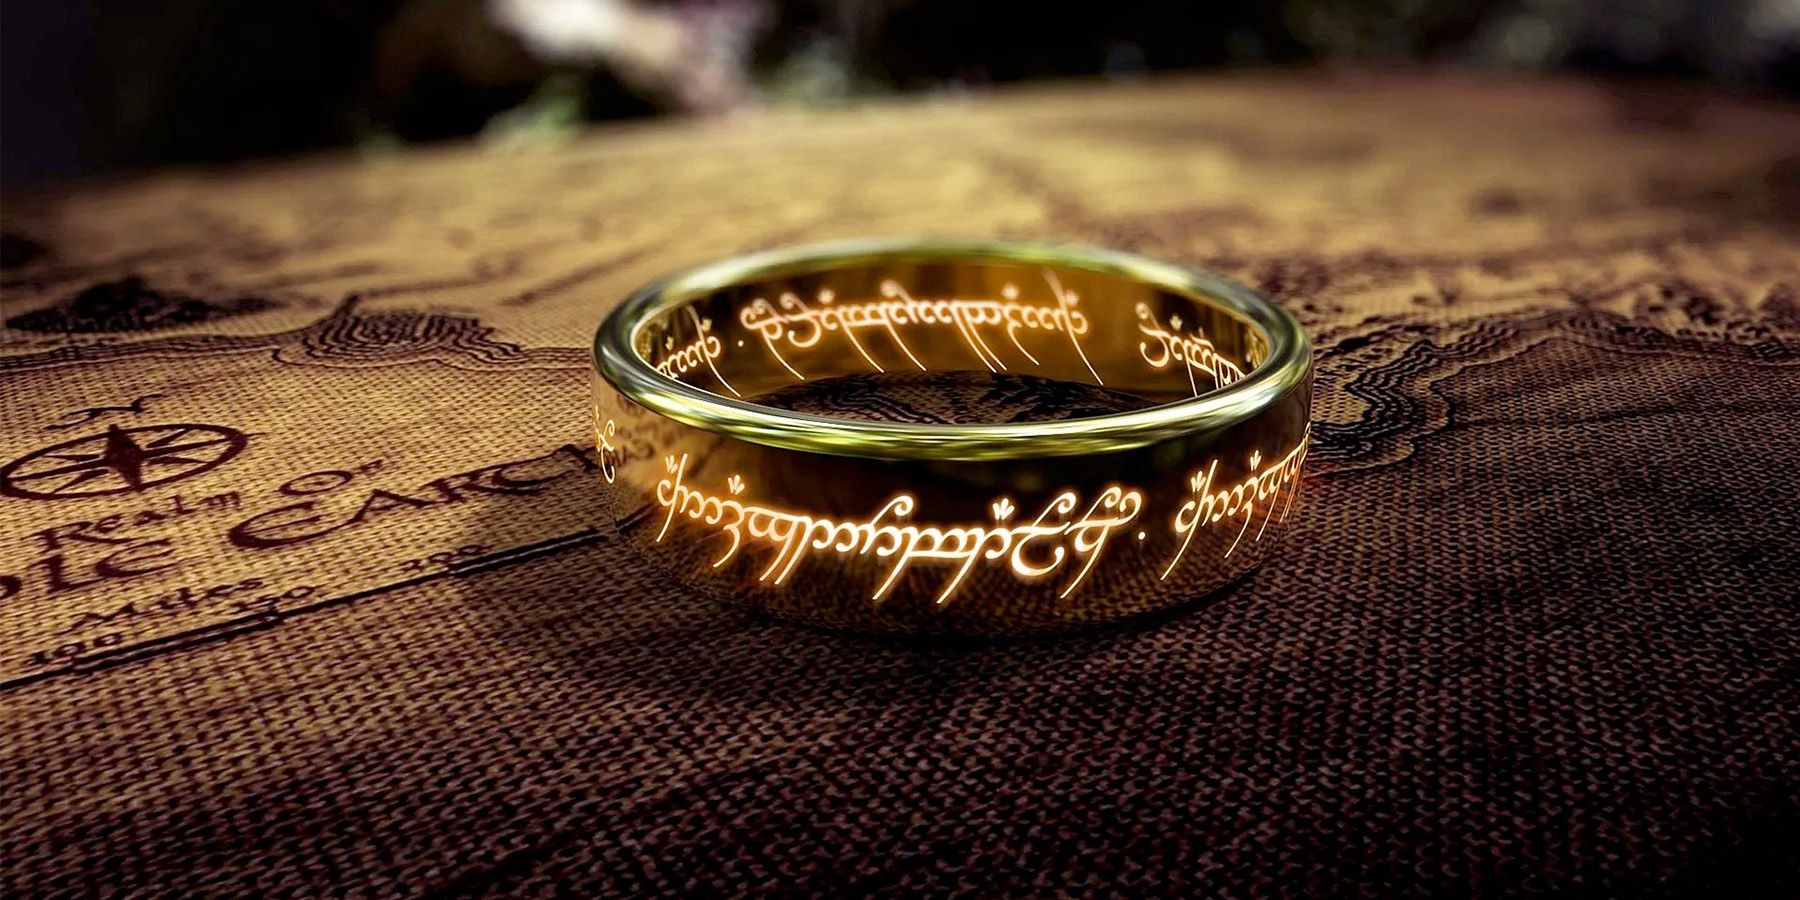 Lord-of-the-Rings-One-Ring.jpg